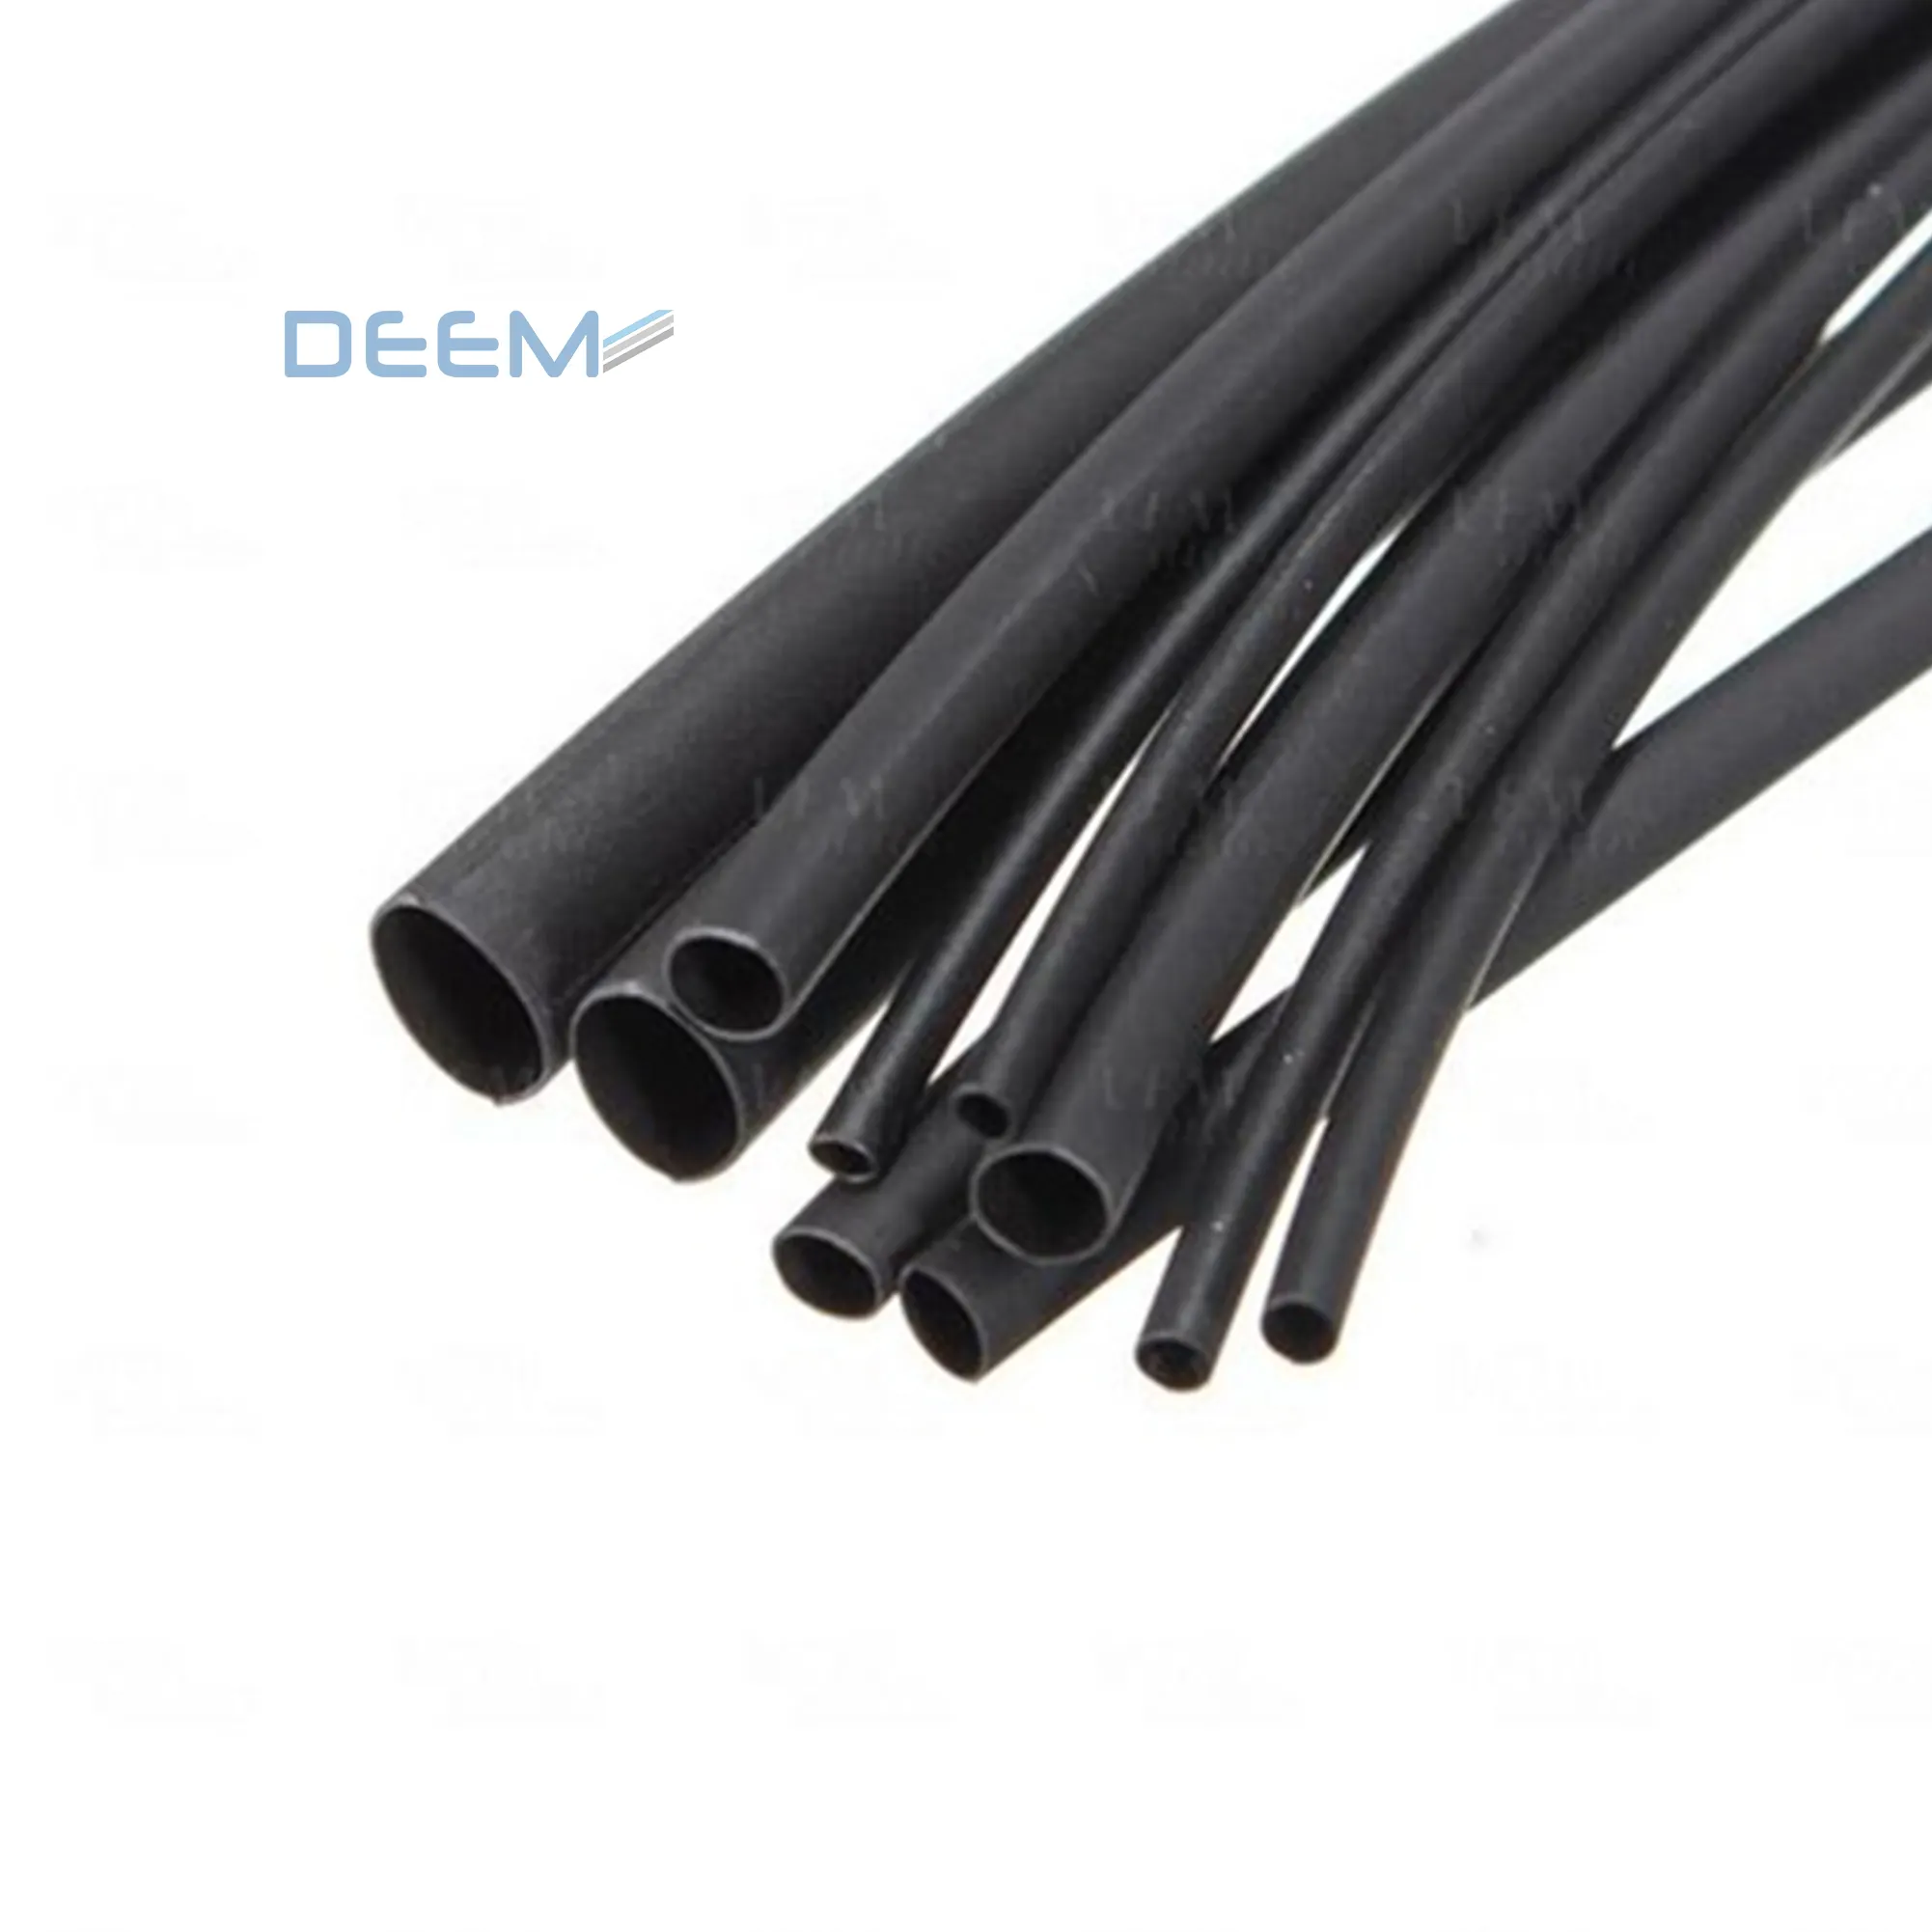 DEEM Electrical insulation heat shrink tube for wire general purpose protection and insulation